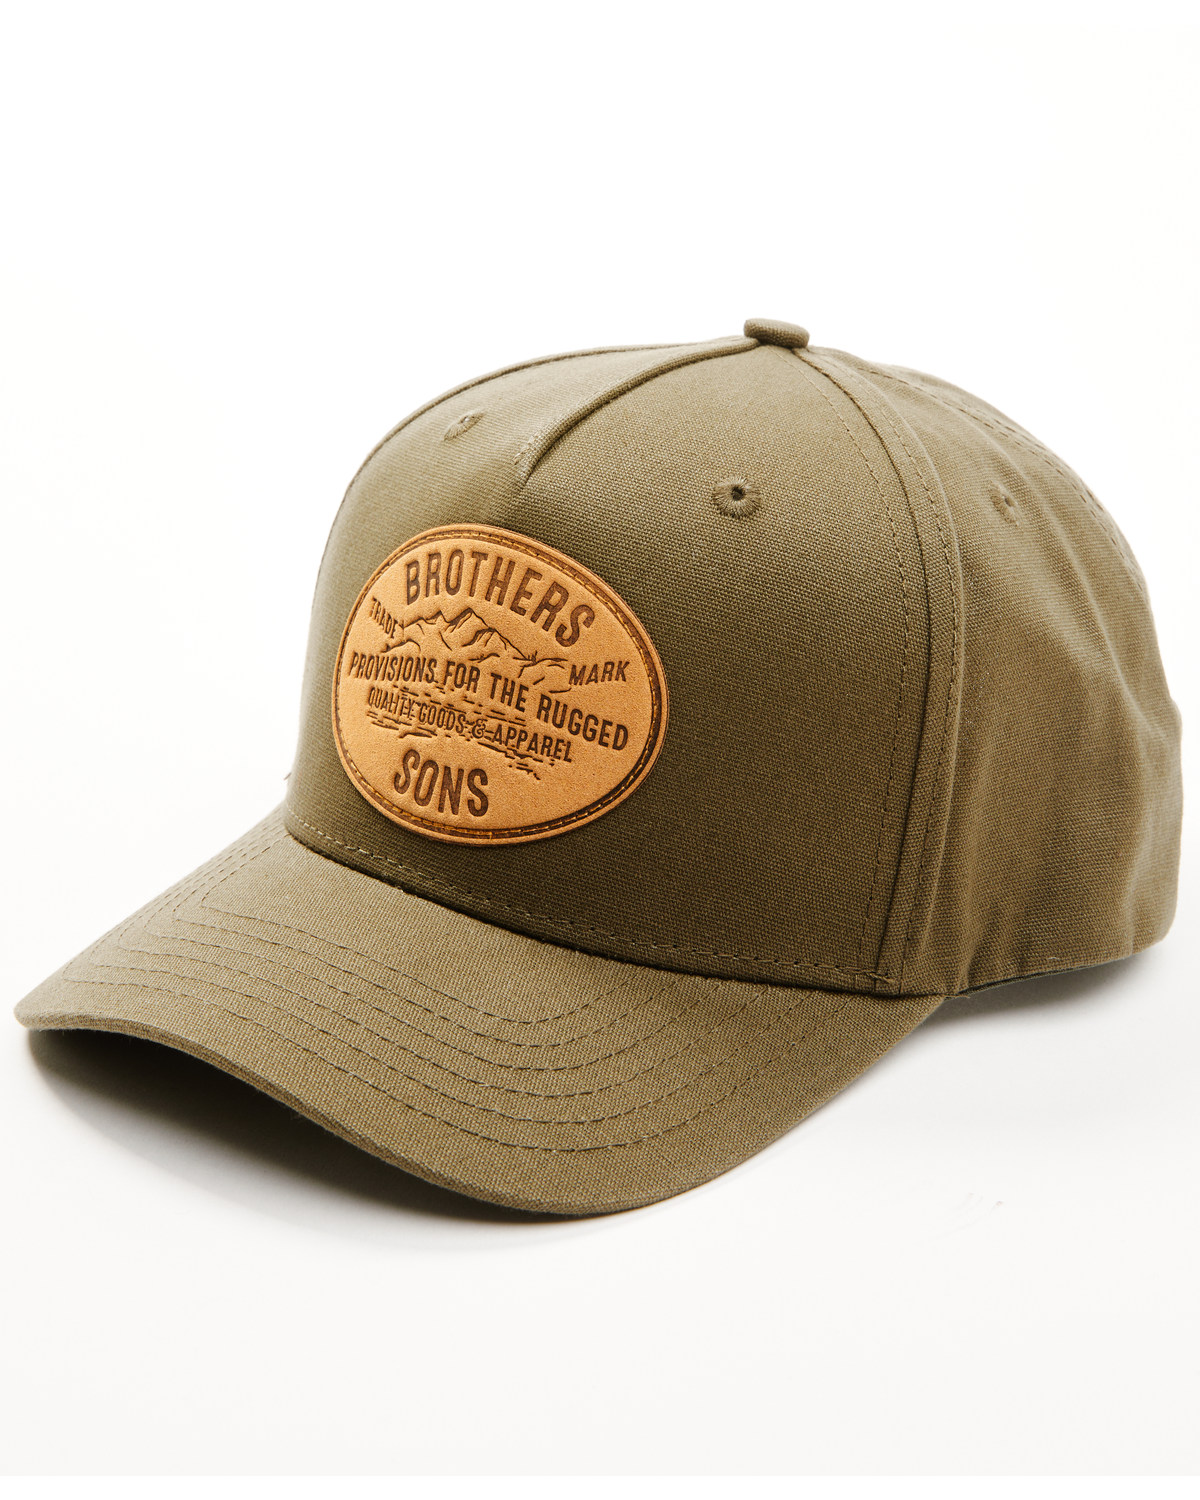 Brothers and Sons Men's Provisions For The Rugged Leather Patch Ball Cap